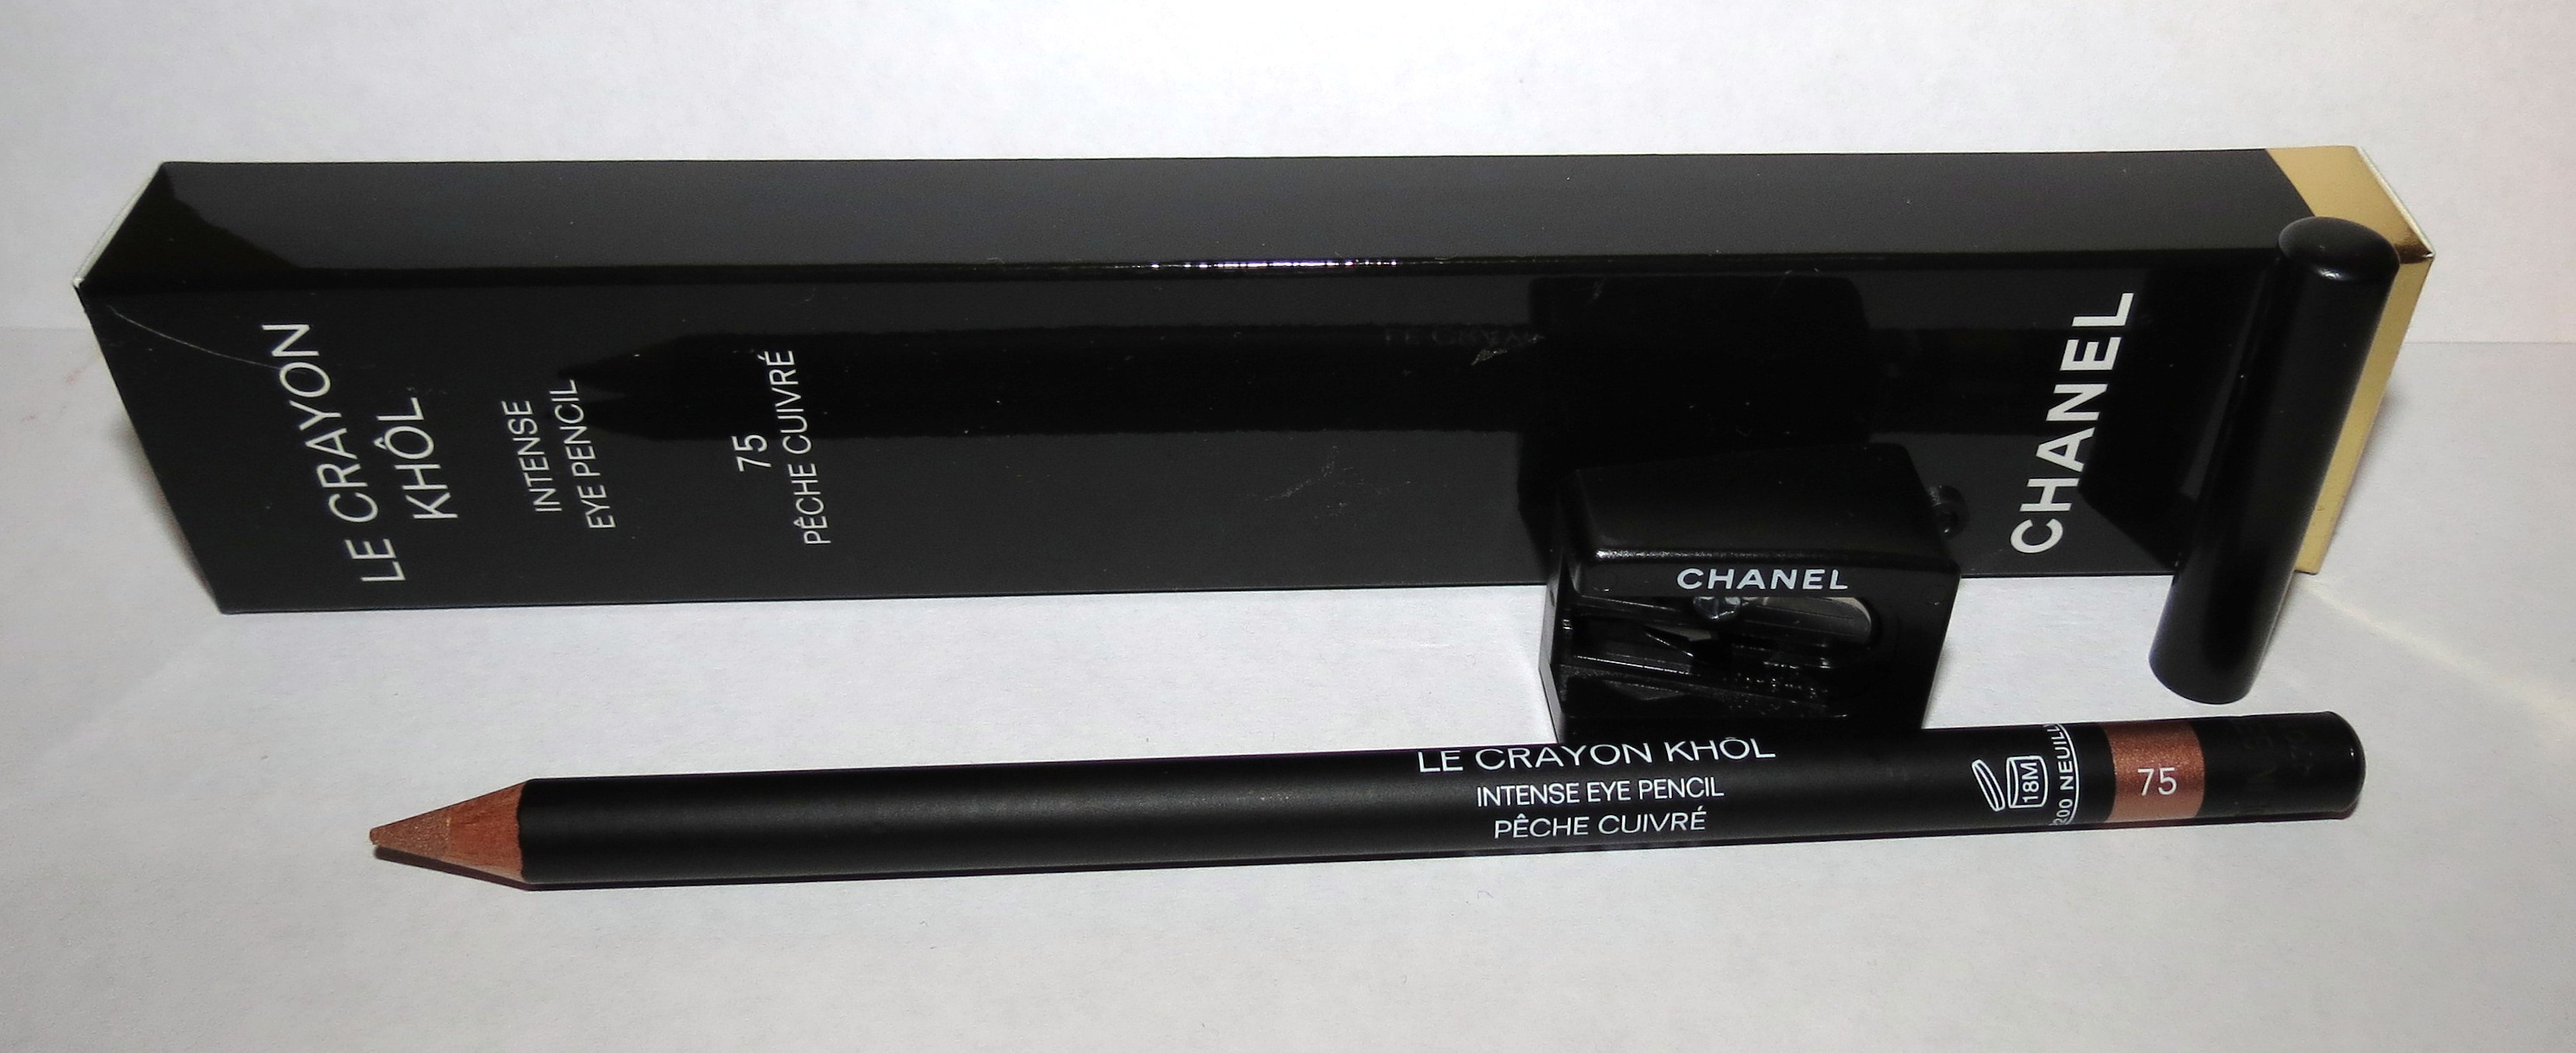 Chanel PECHE CUIVRE Le Crayon Kohl Eye Pencil Swatches and Review – Summer  2012 - Blushing Noir